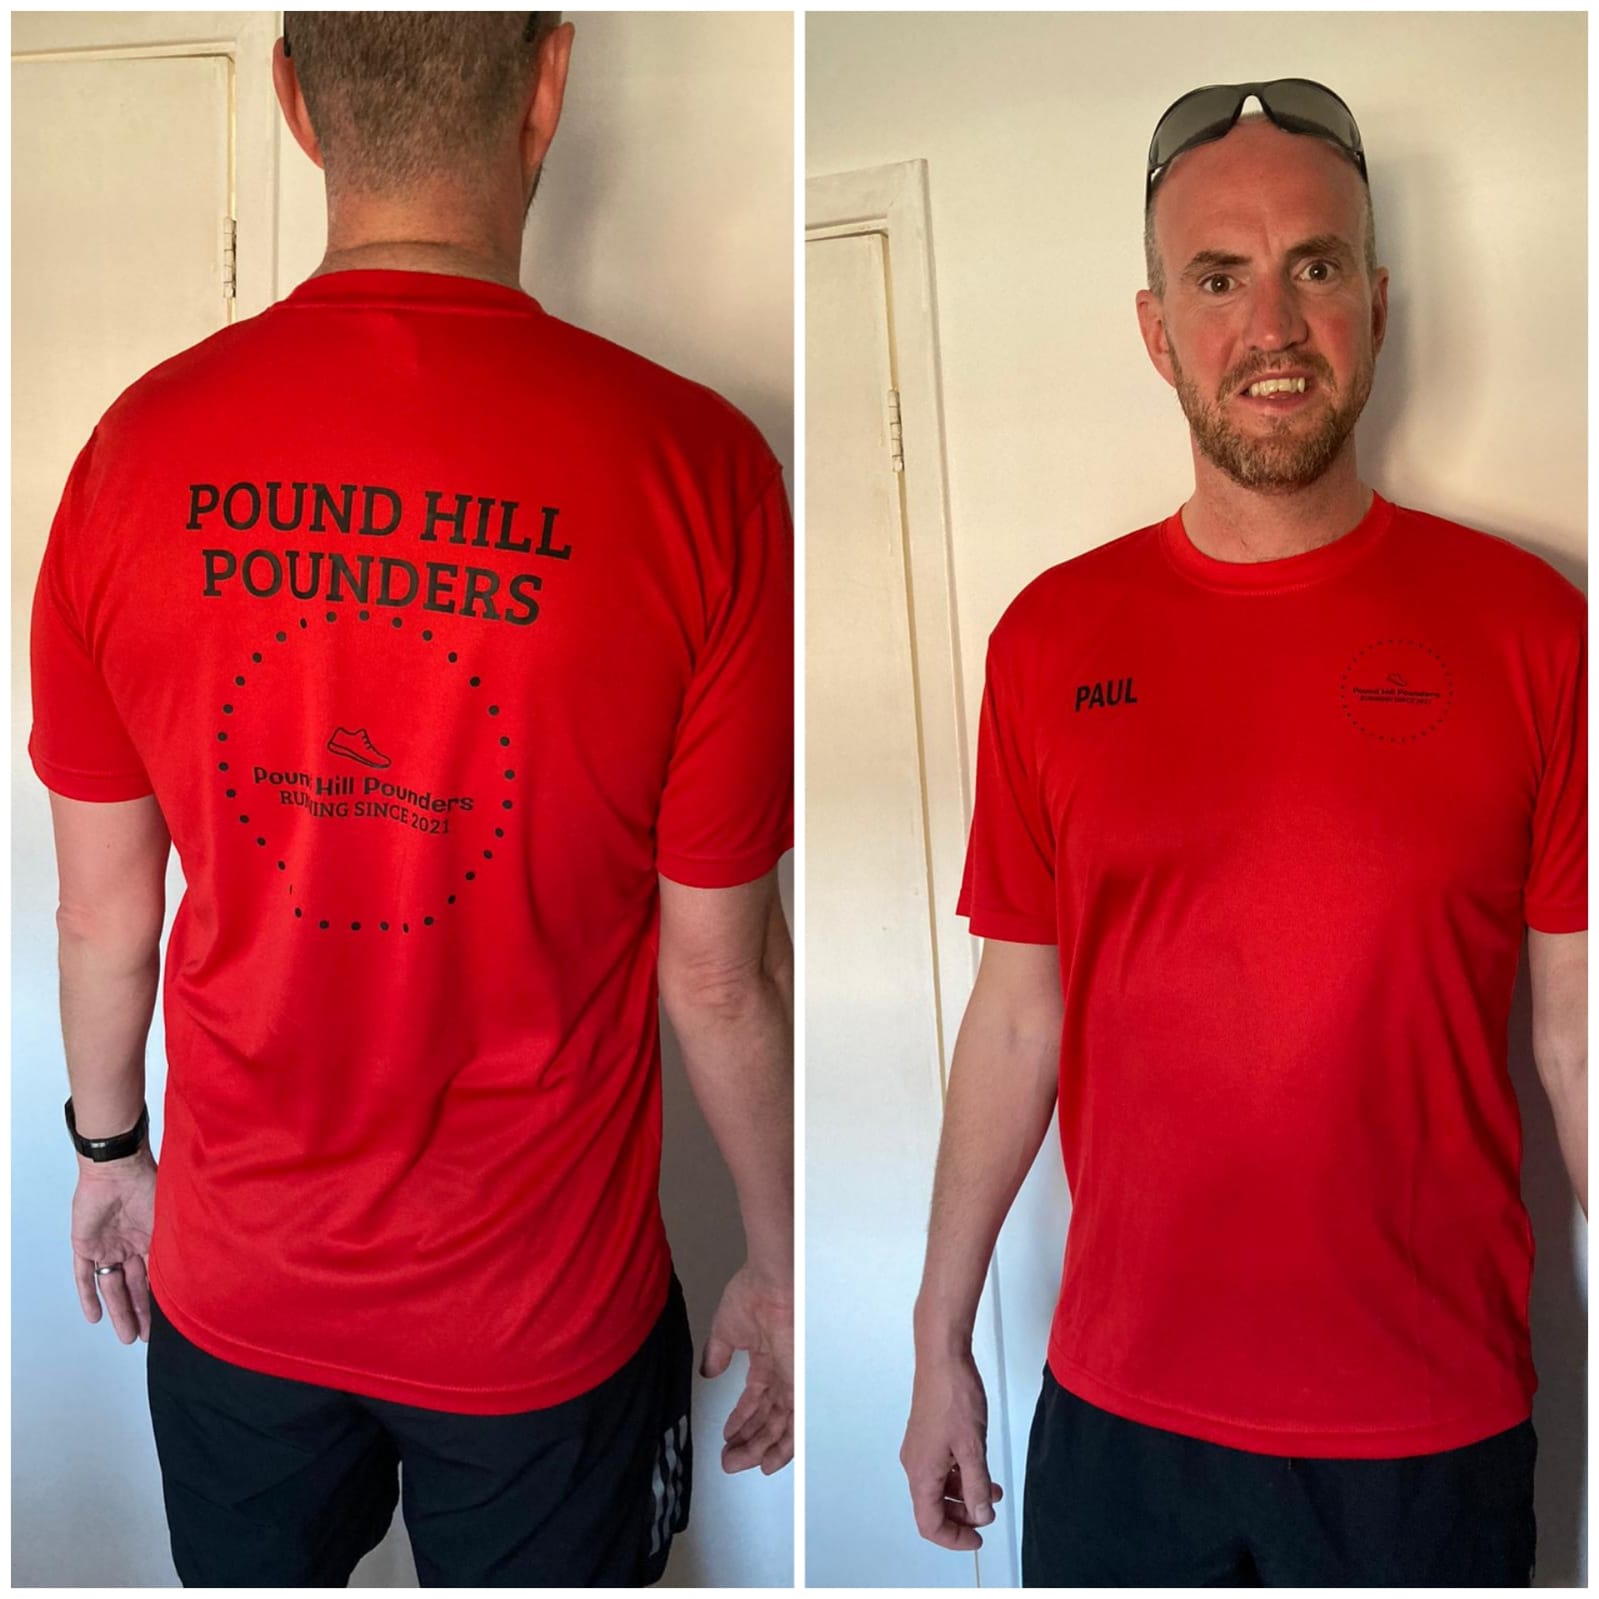 paul modelling a red running tshirt